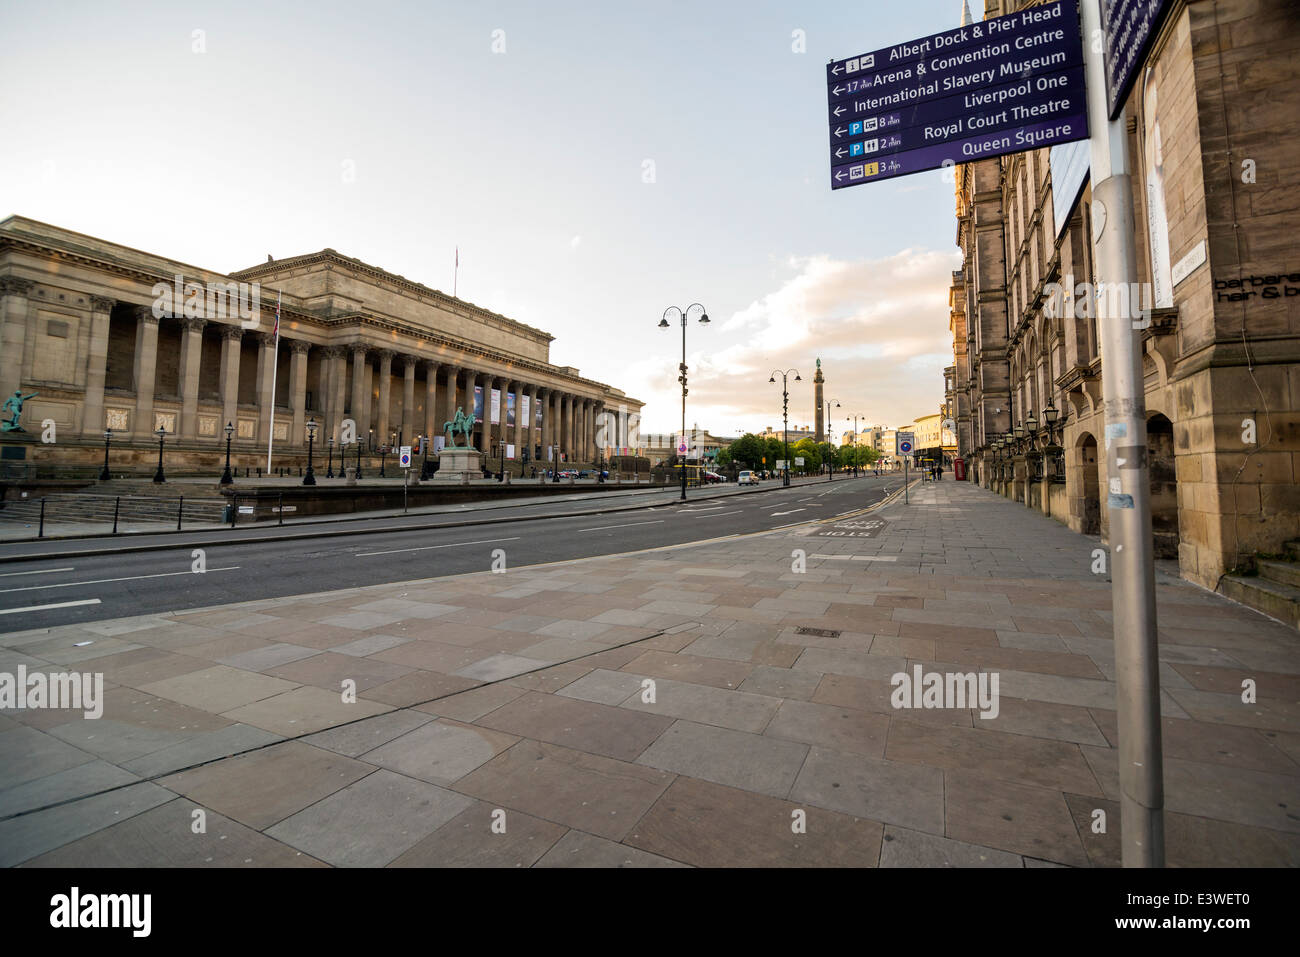 St. Georges hall is a neoclassical building situated on lime street Liverpool city centre. Stock Photo